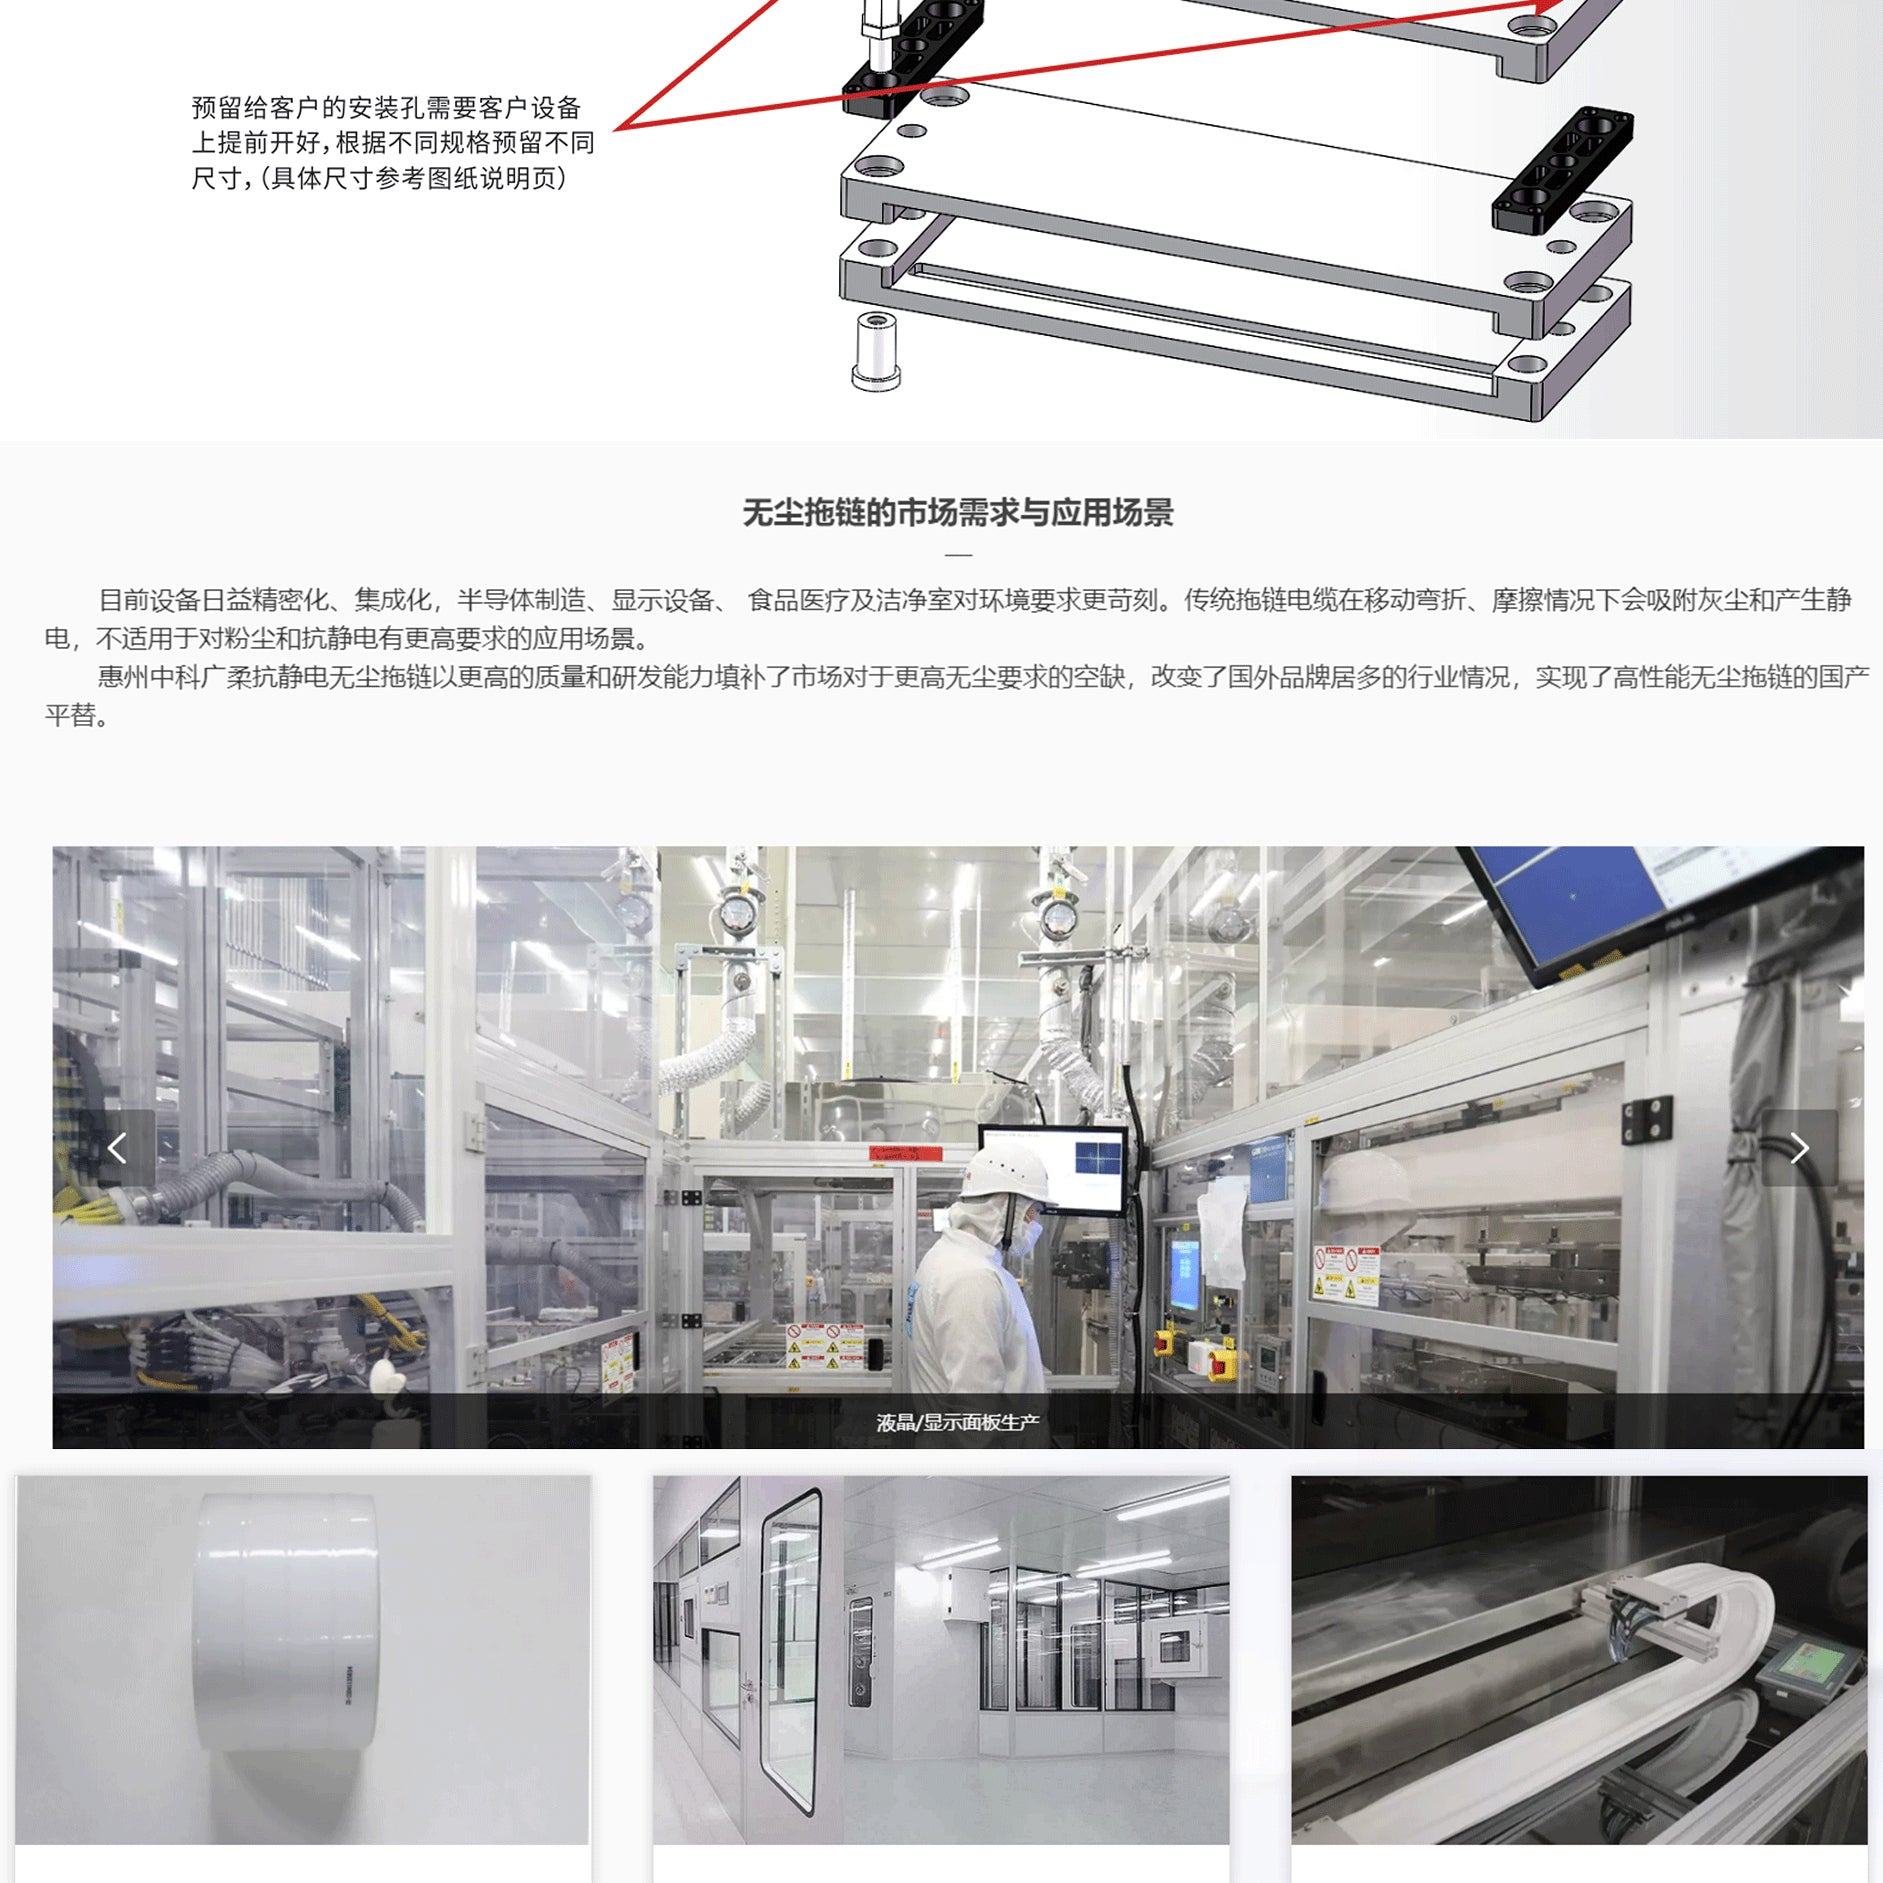 High quality flexibility dust-free drag chain, clean room dust free towline - Premium dust-free drag chain from GuangRou - Source Manufacturer, Customized Solutions.